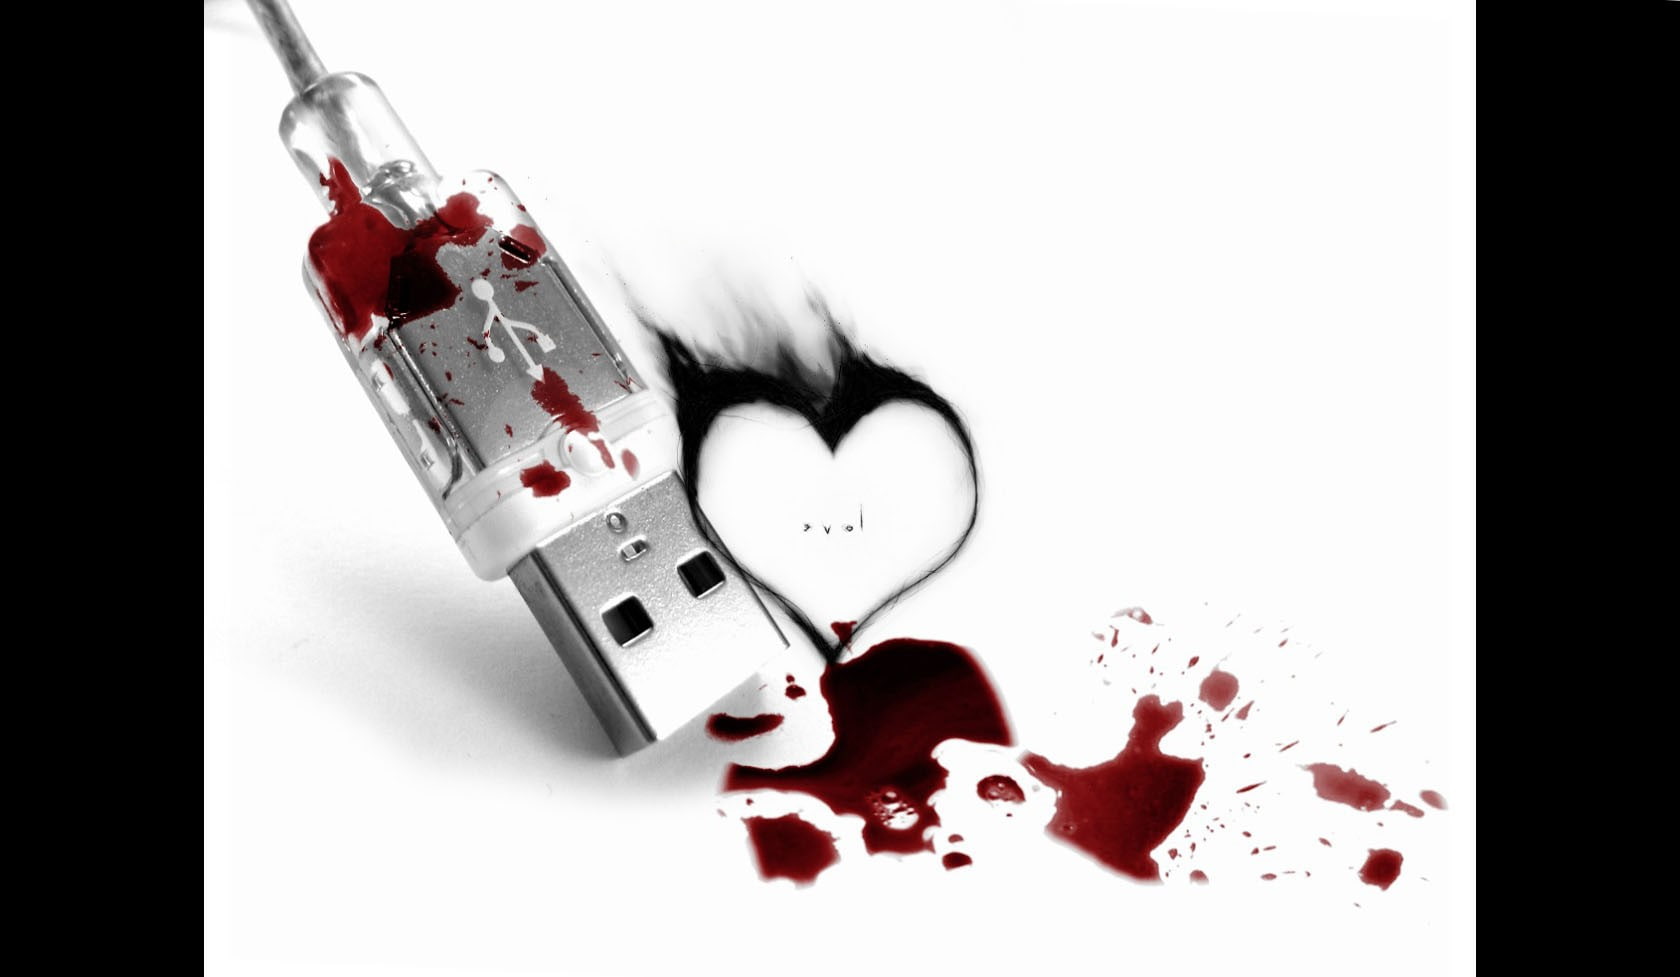 usb blood and heart, indoors, studio shot, red, drop, spilling